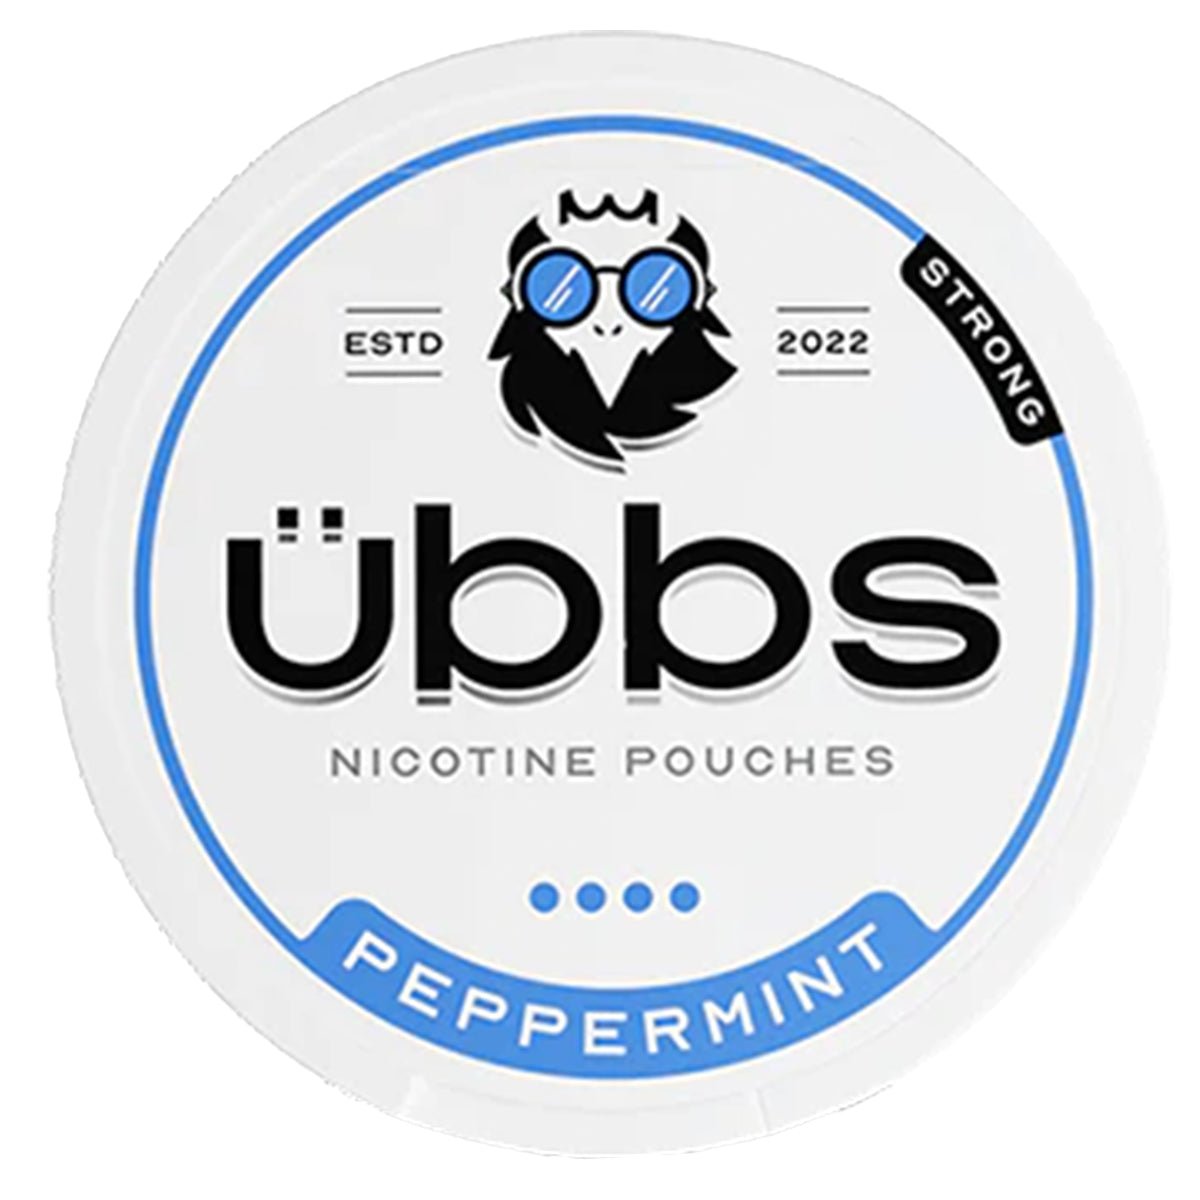 Peppermint Nicotine Pouches By Ubbs - Prime Vapes UK